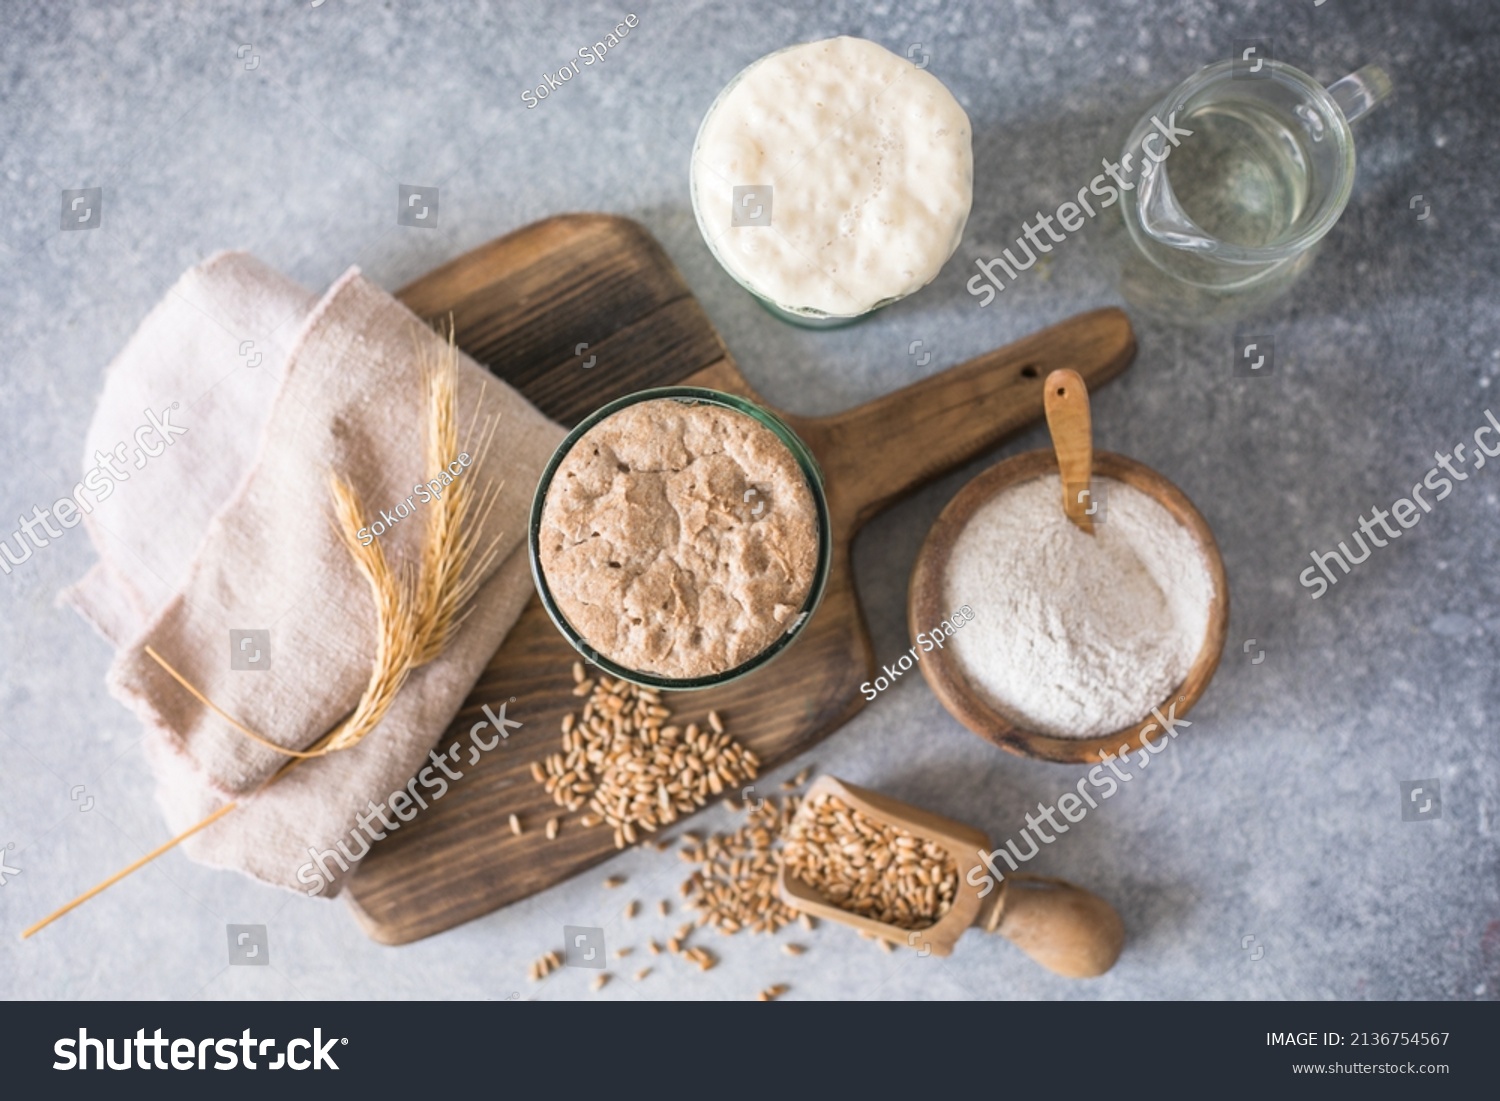 The rye and wheat leaven for bread is active. Starter sourdough ( fermented mixture of water and flour to use as leaven for bread baking). The concept of a healthy die #2136754567